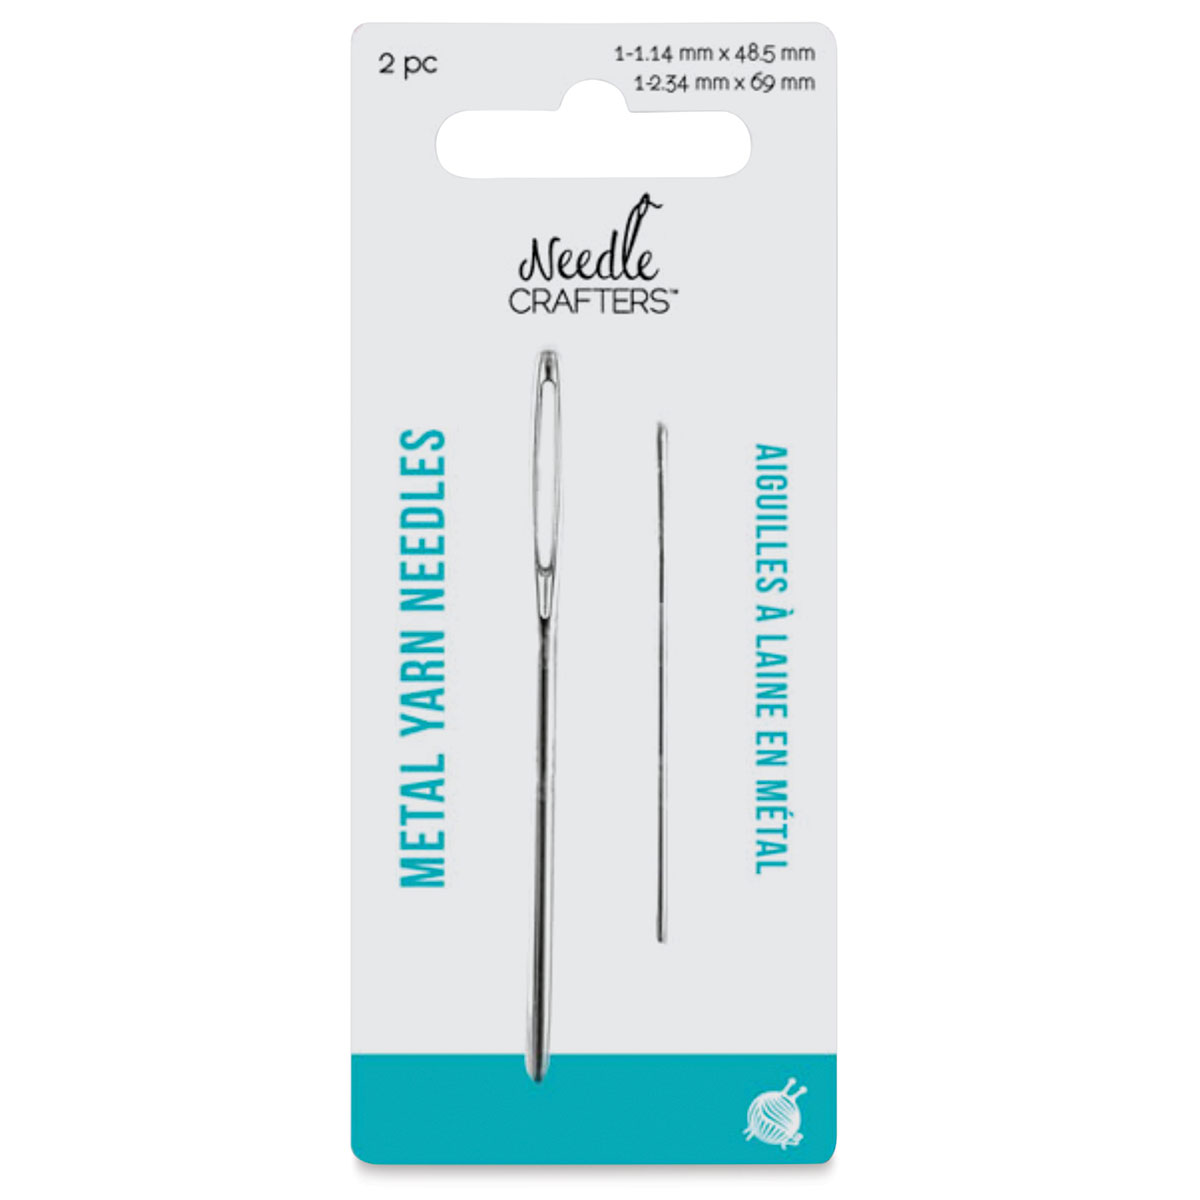 Needle Crafters Finishing Needles - Plastic, Package of 6